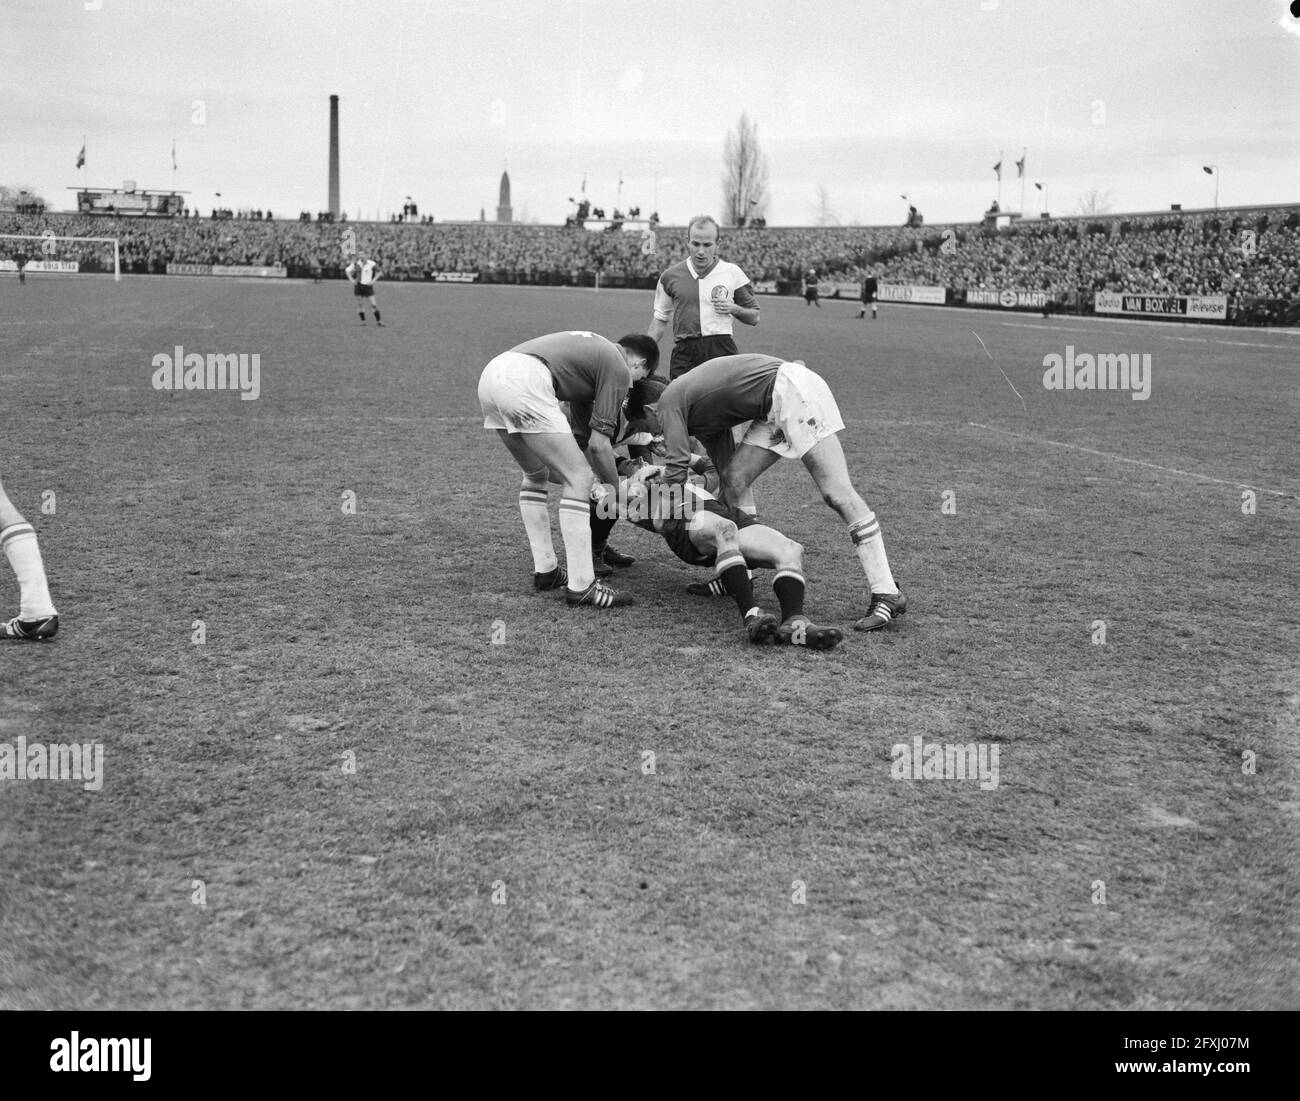 Willem II against Feyenoord, Coen Moulijn injured, 26 February 1961, sports, soccer, The Netherlands, 20th century press agency photo, news to remember, documentary, historic photography 1945-1990, visual stories, human history of the Twentieth Century, capturing moments in time Stock Photo